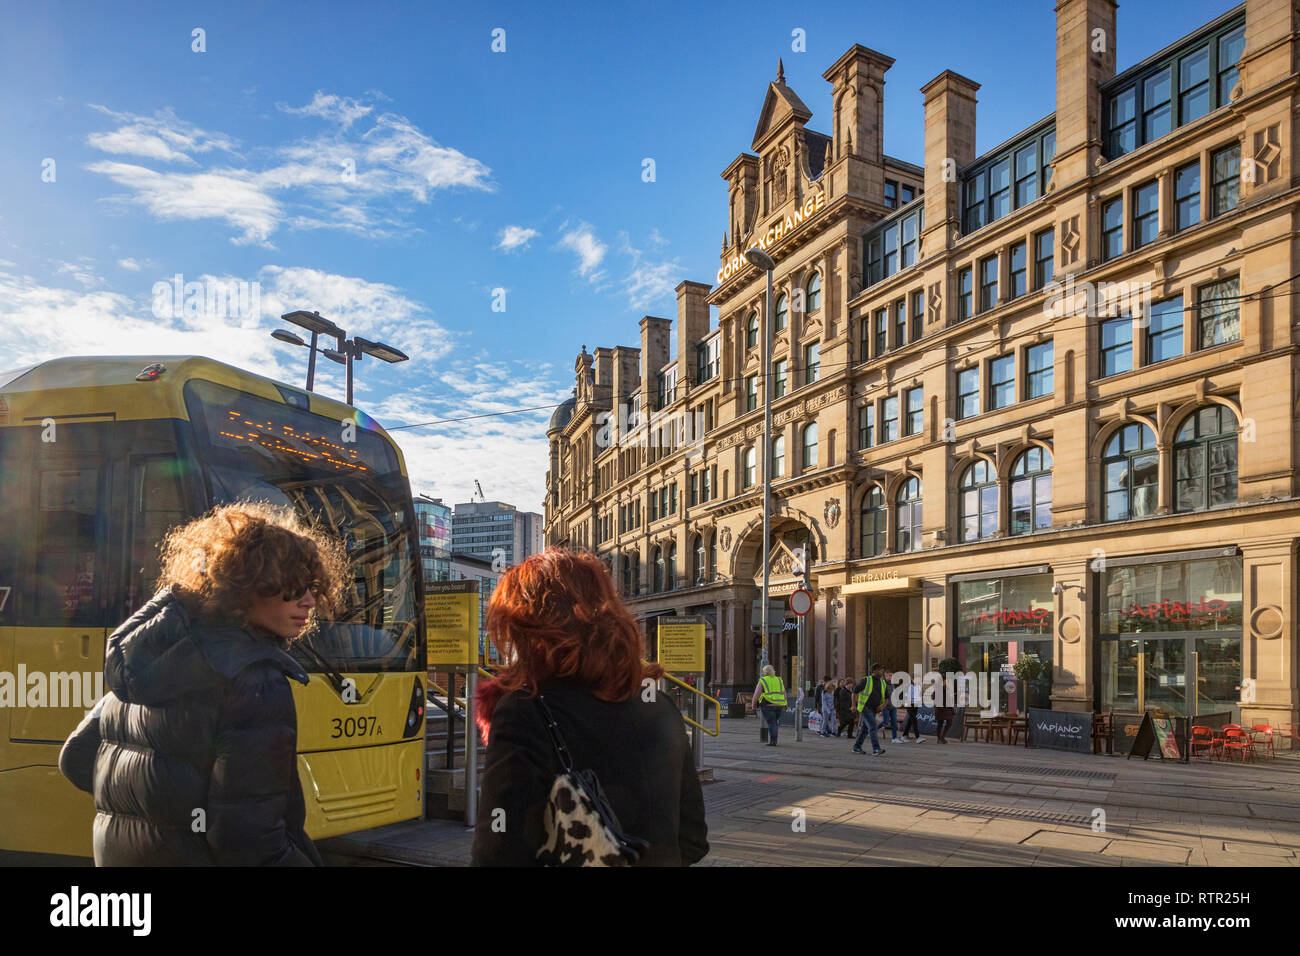 2 September 2018: Manchester, UK - Exchange Square, with Corn Exchange building, Metrolink tram, two young women with backlit hair, and flare. Stock Photo